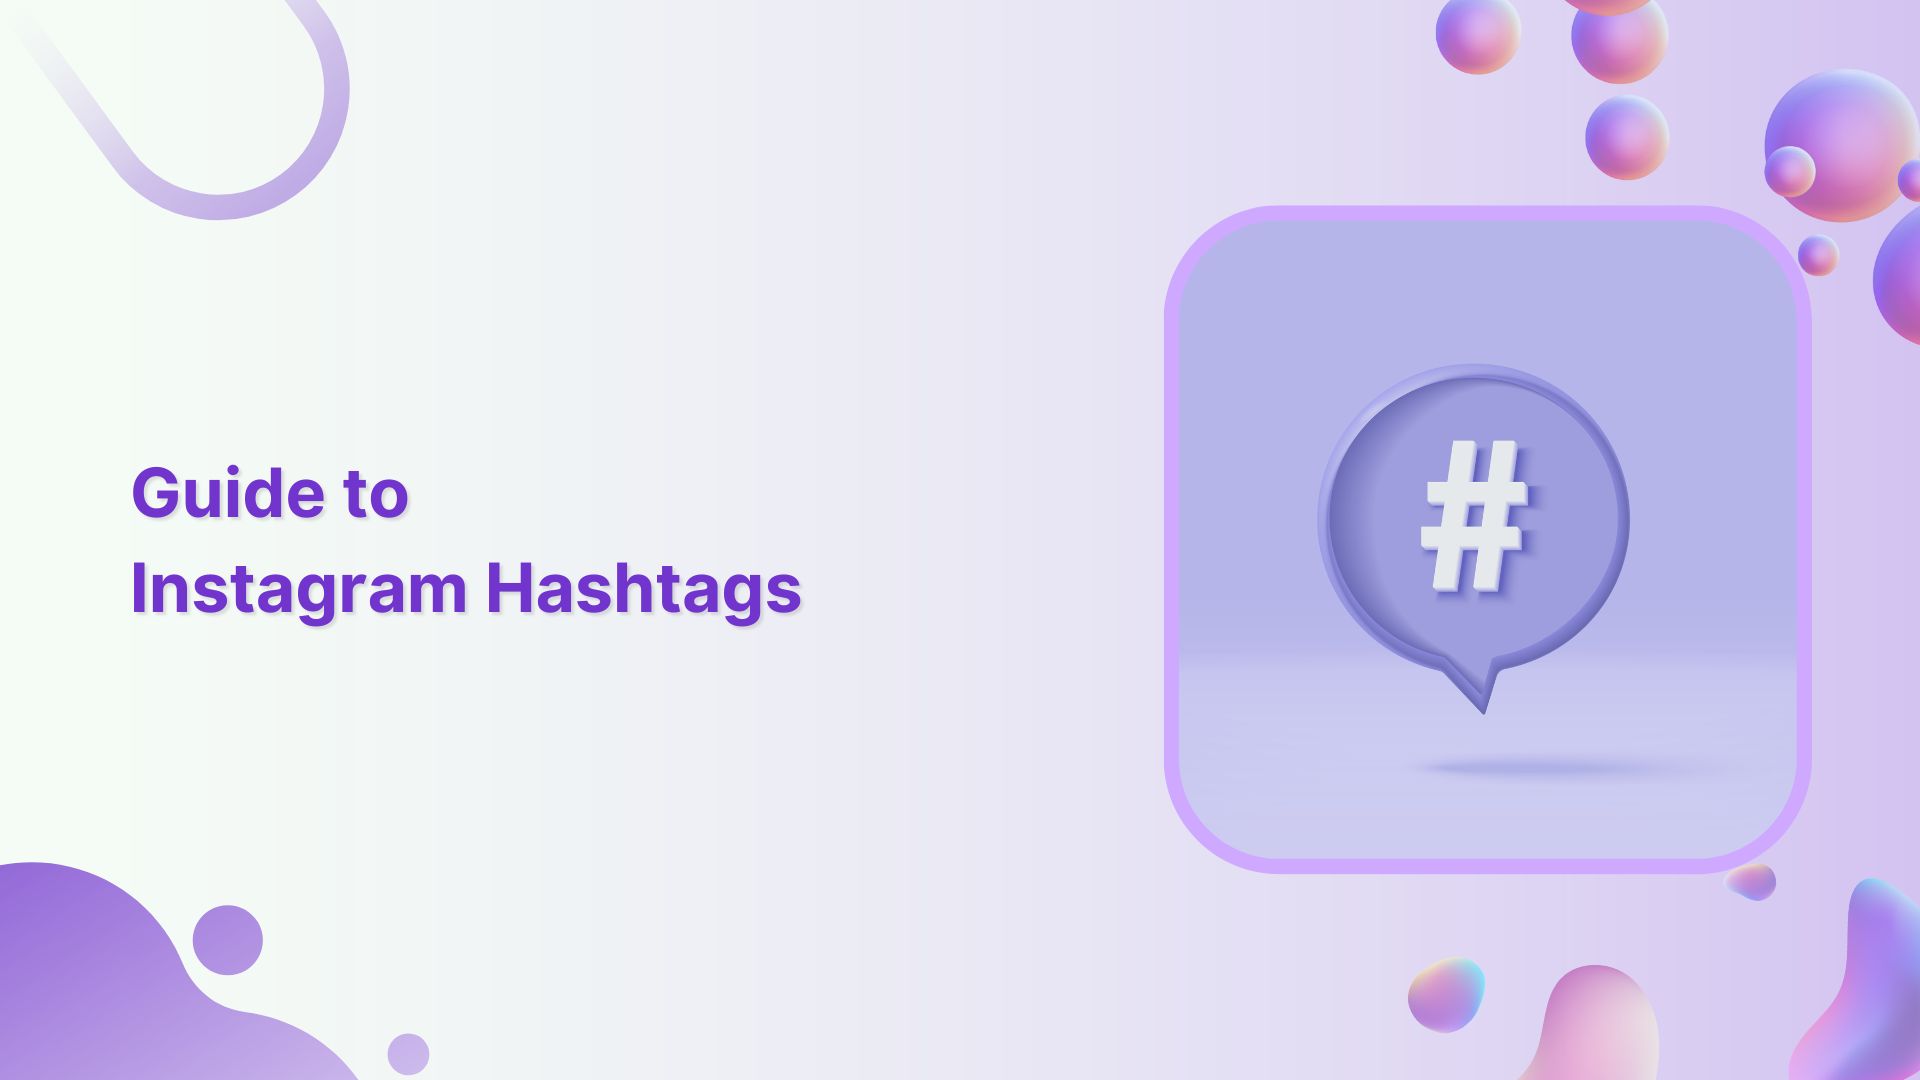 Guide to Hashtags for Instagram: How to Use Them Effectively